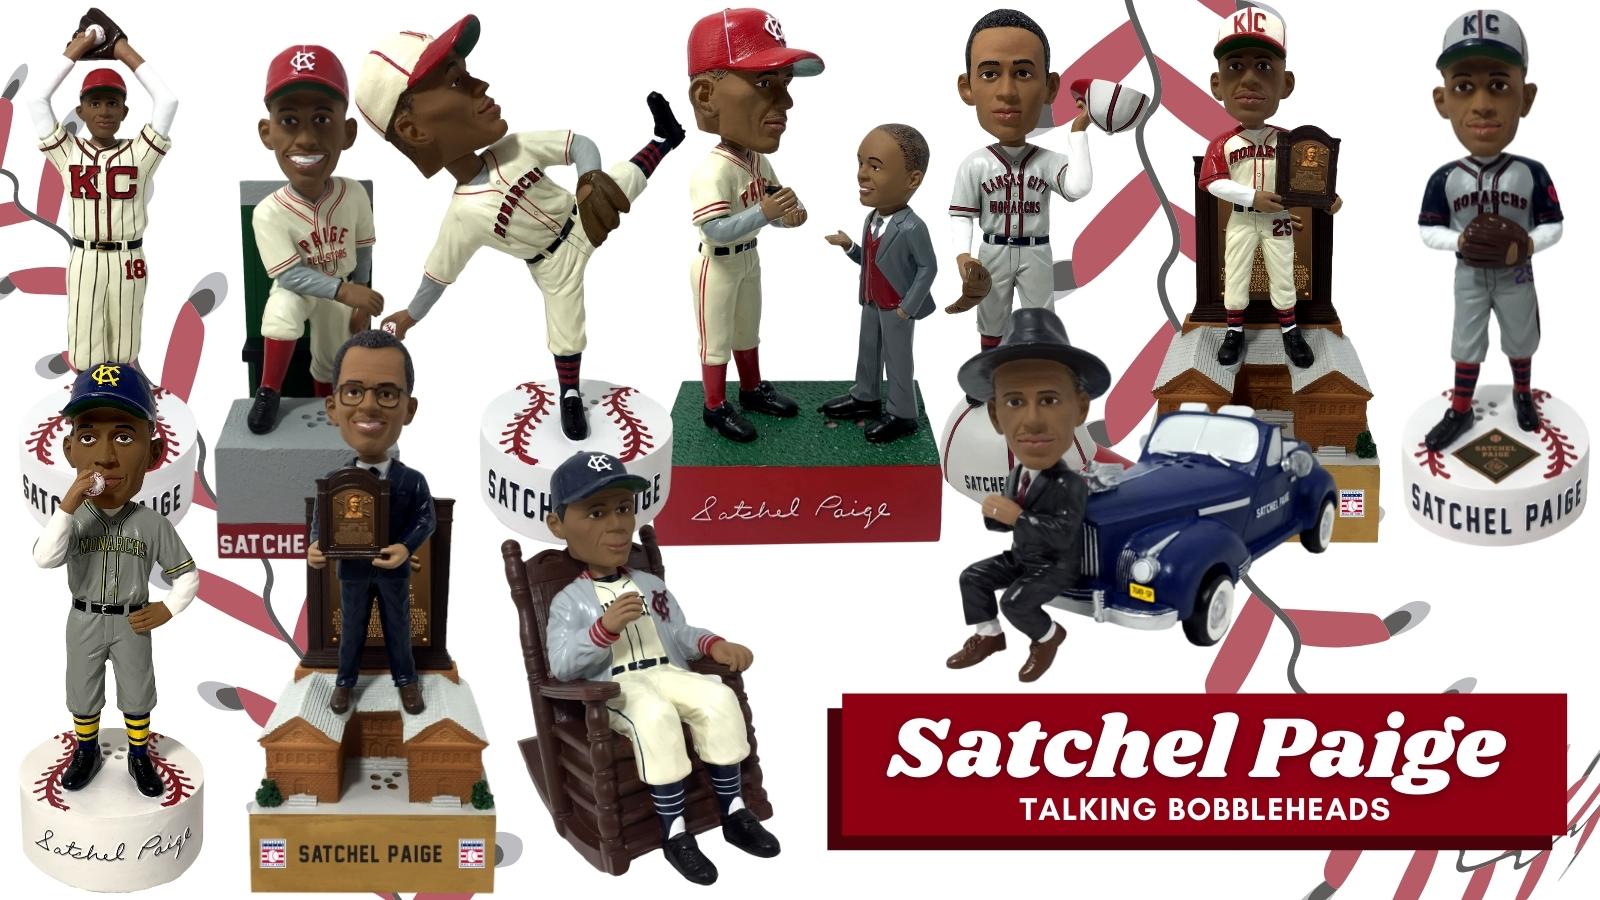 Check out these Chicago Cubs Field of Dreams Game bobbleheads